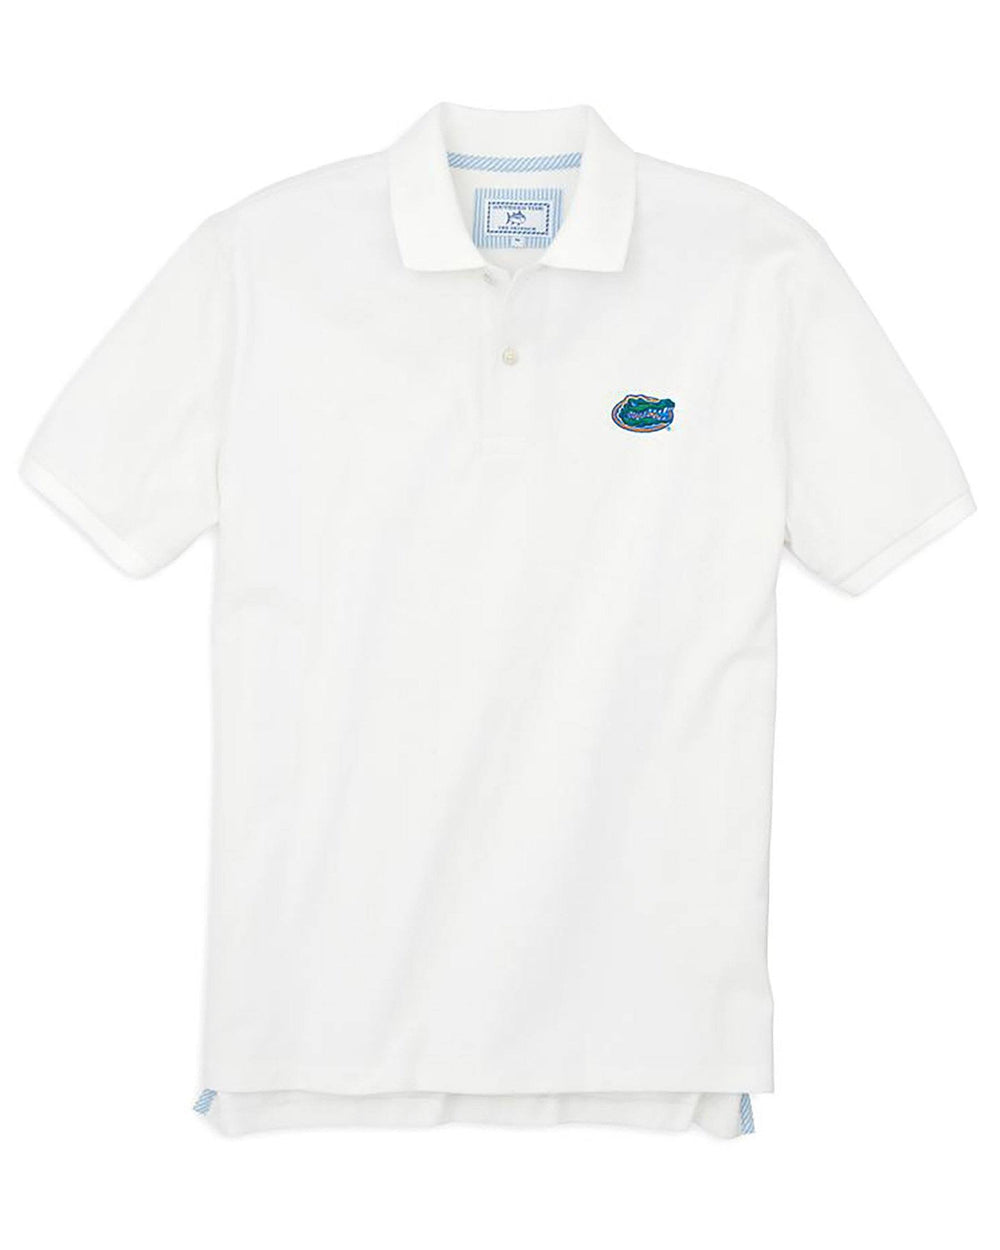 The front view of the Men's White Florida Gators Pique Polo Shirt by Southern Tide - Classic White